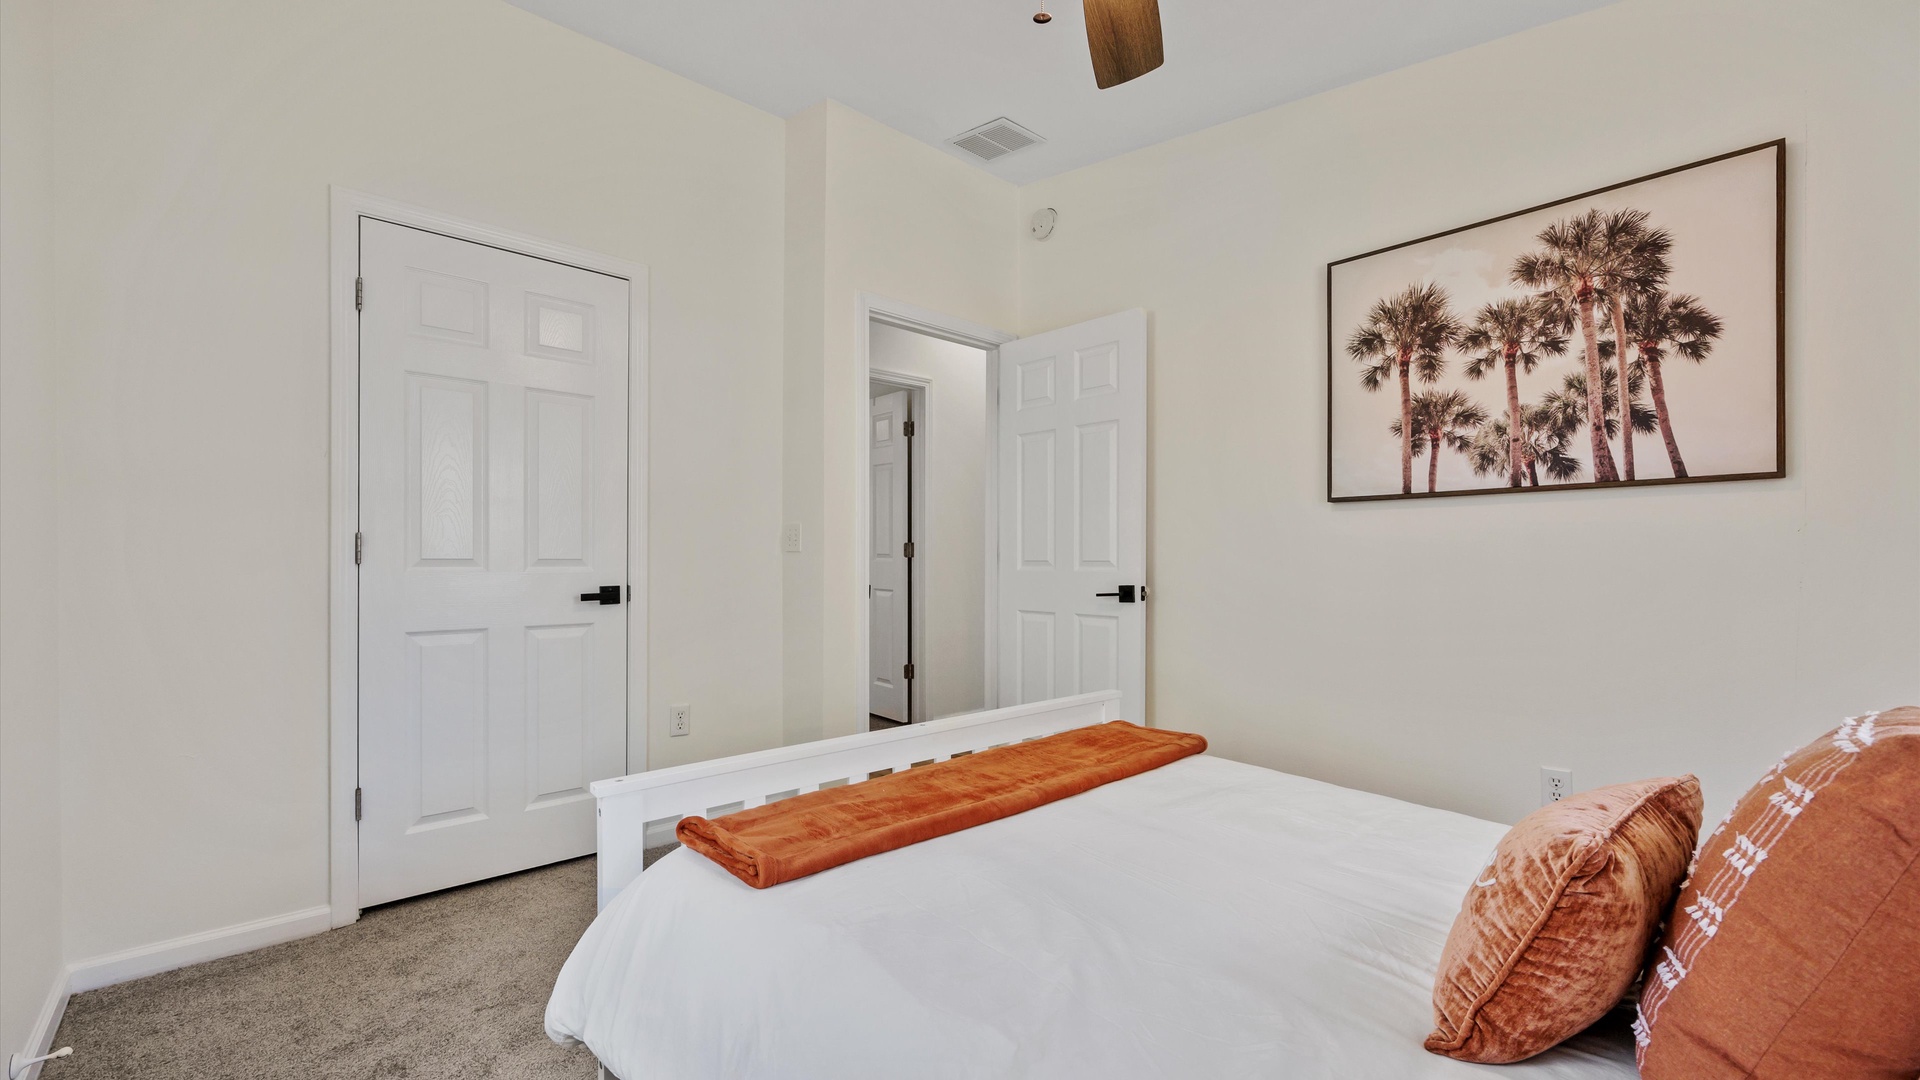 The final bedroom offers a comfy full-sized bed & tranquil views